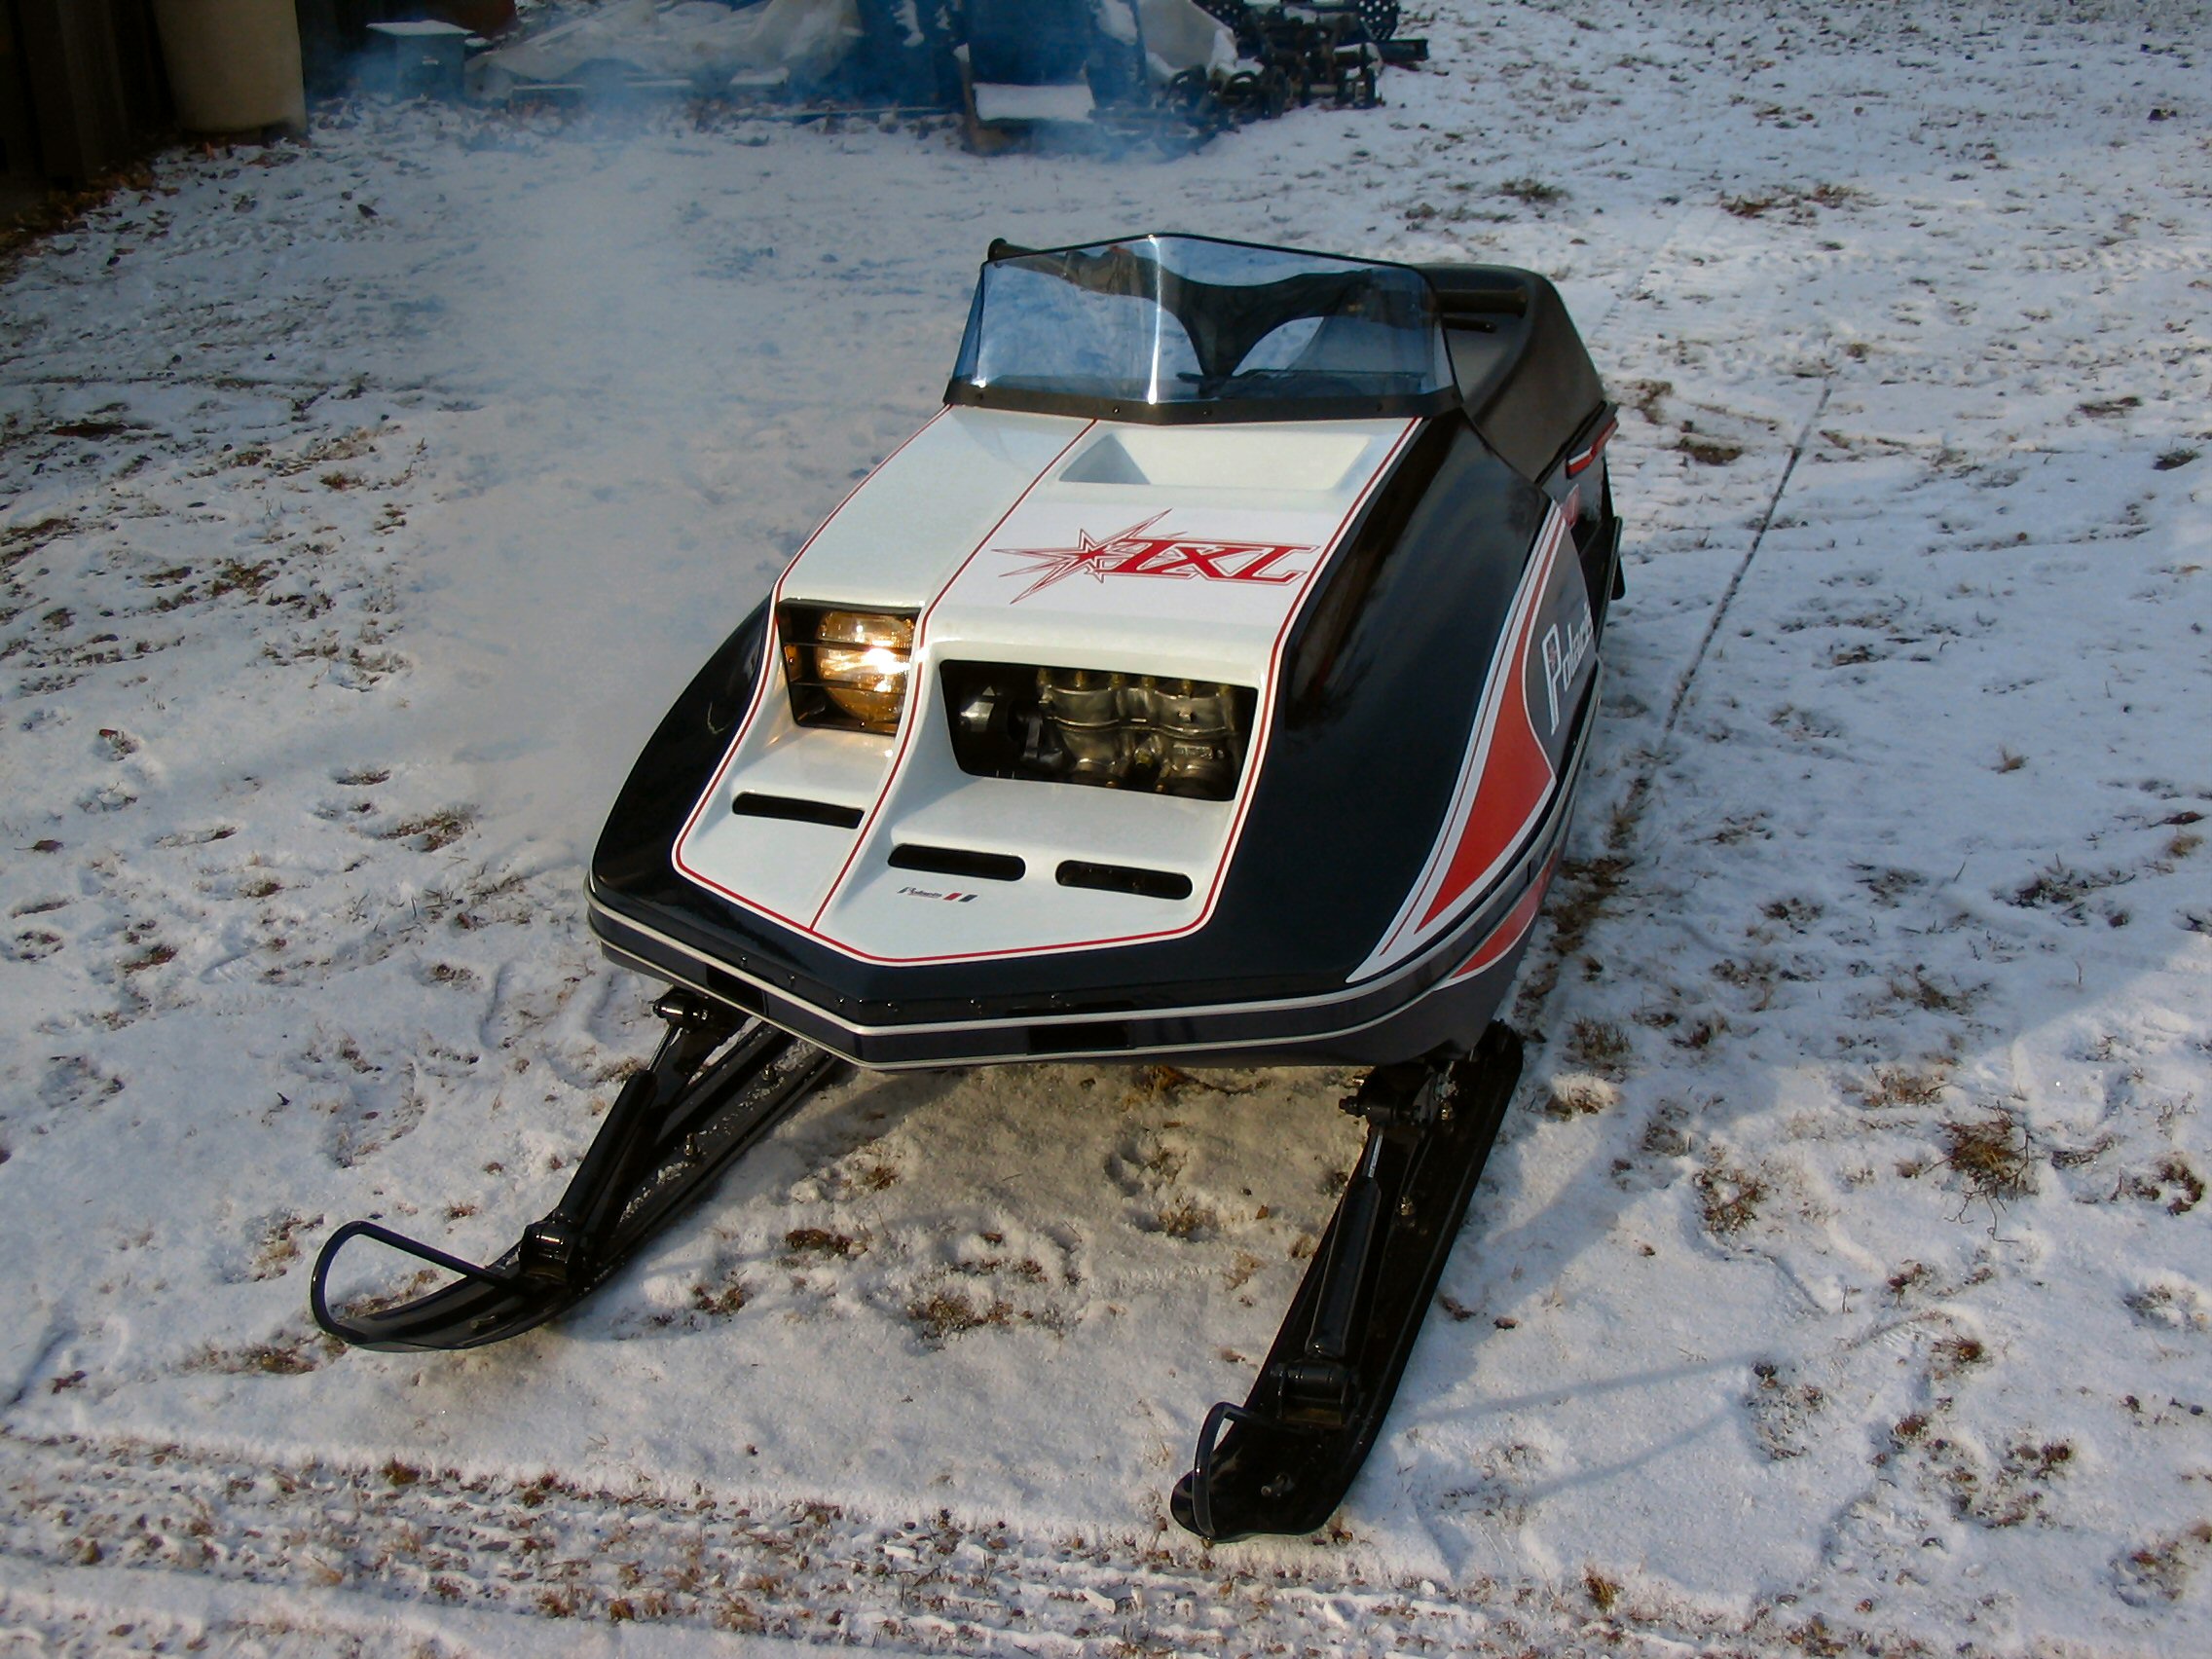 1978 Polaris TXL - Multiple Year Winner of Vintage Snowmobile Competition.